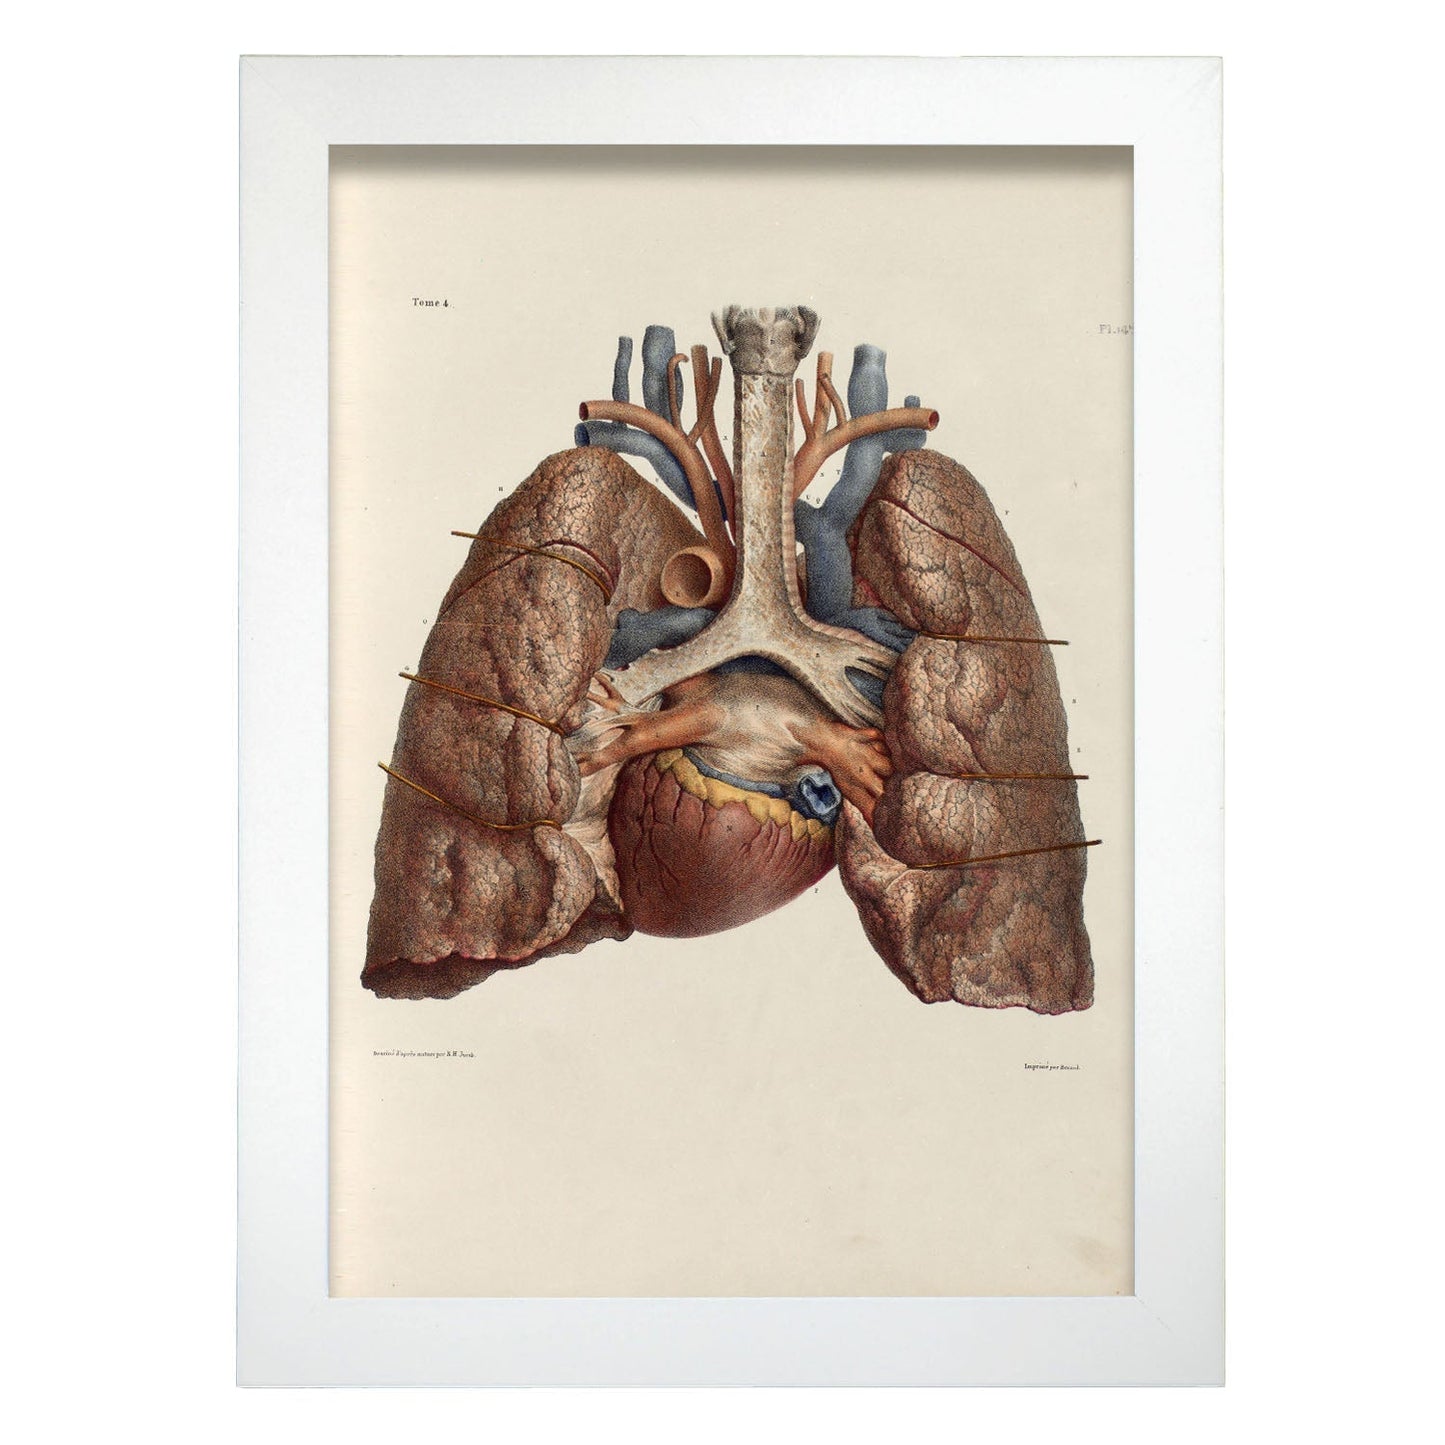 Heart, lungs, trachea and laryngeal cartilages-Artwork-Nacnic-A4-Marco Blanco-Nacnic Estudio SL